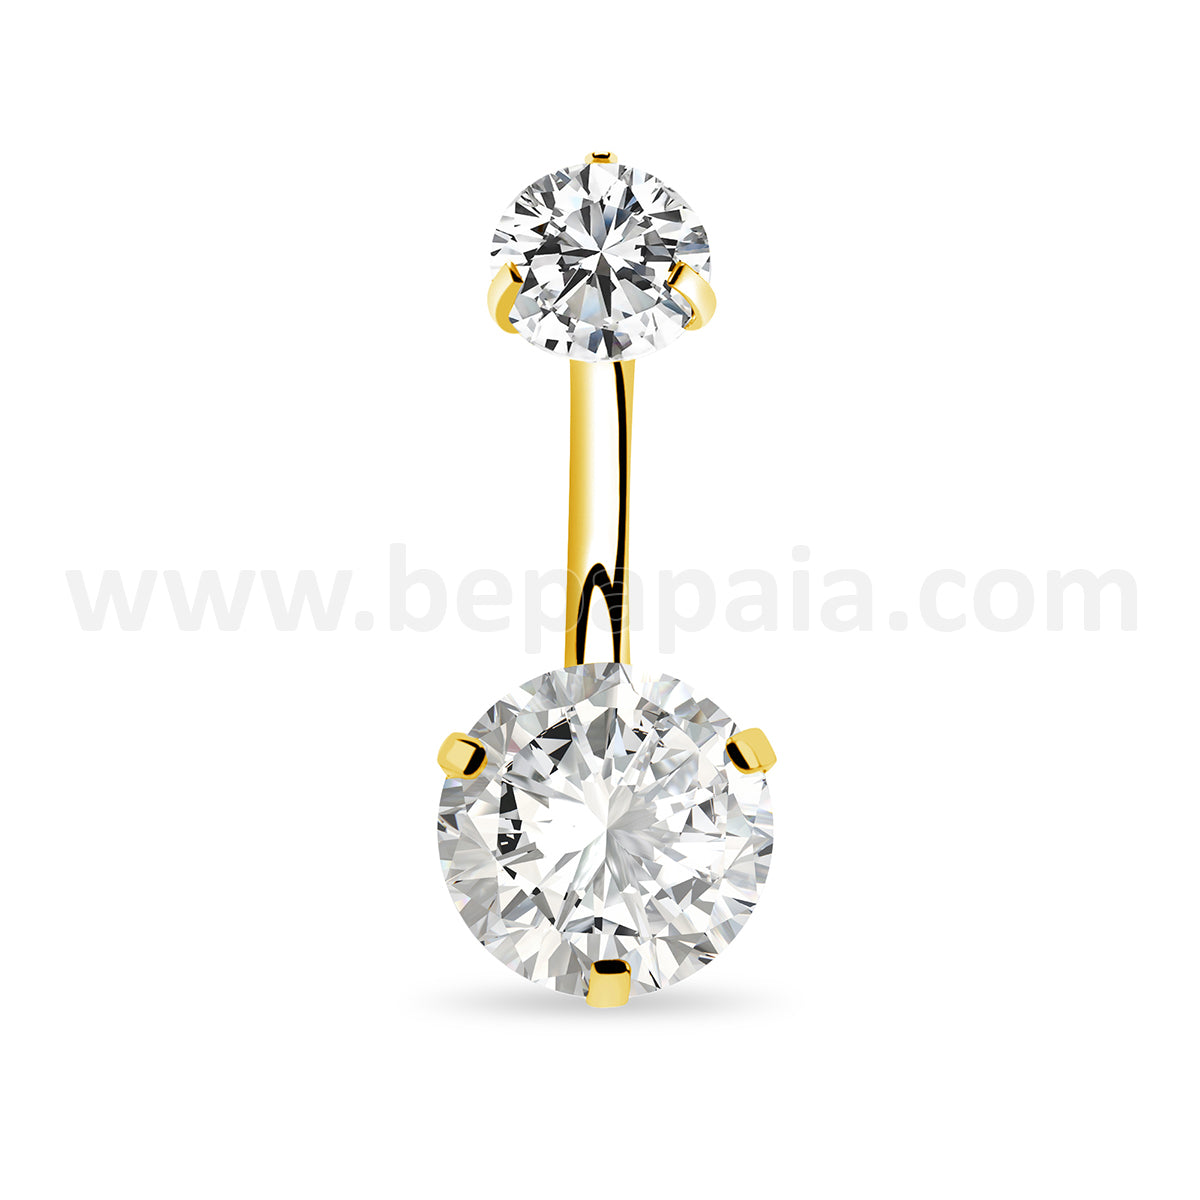 Surgical steel belly ring with gems